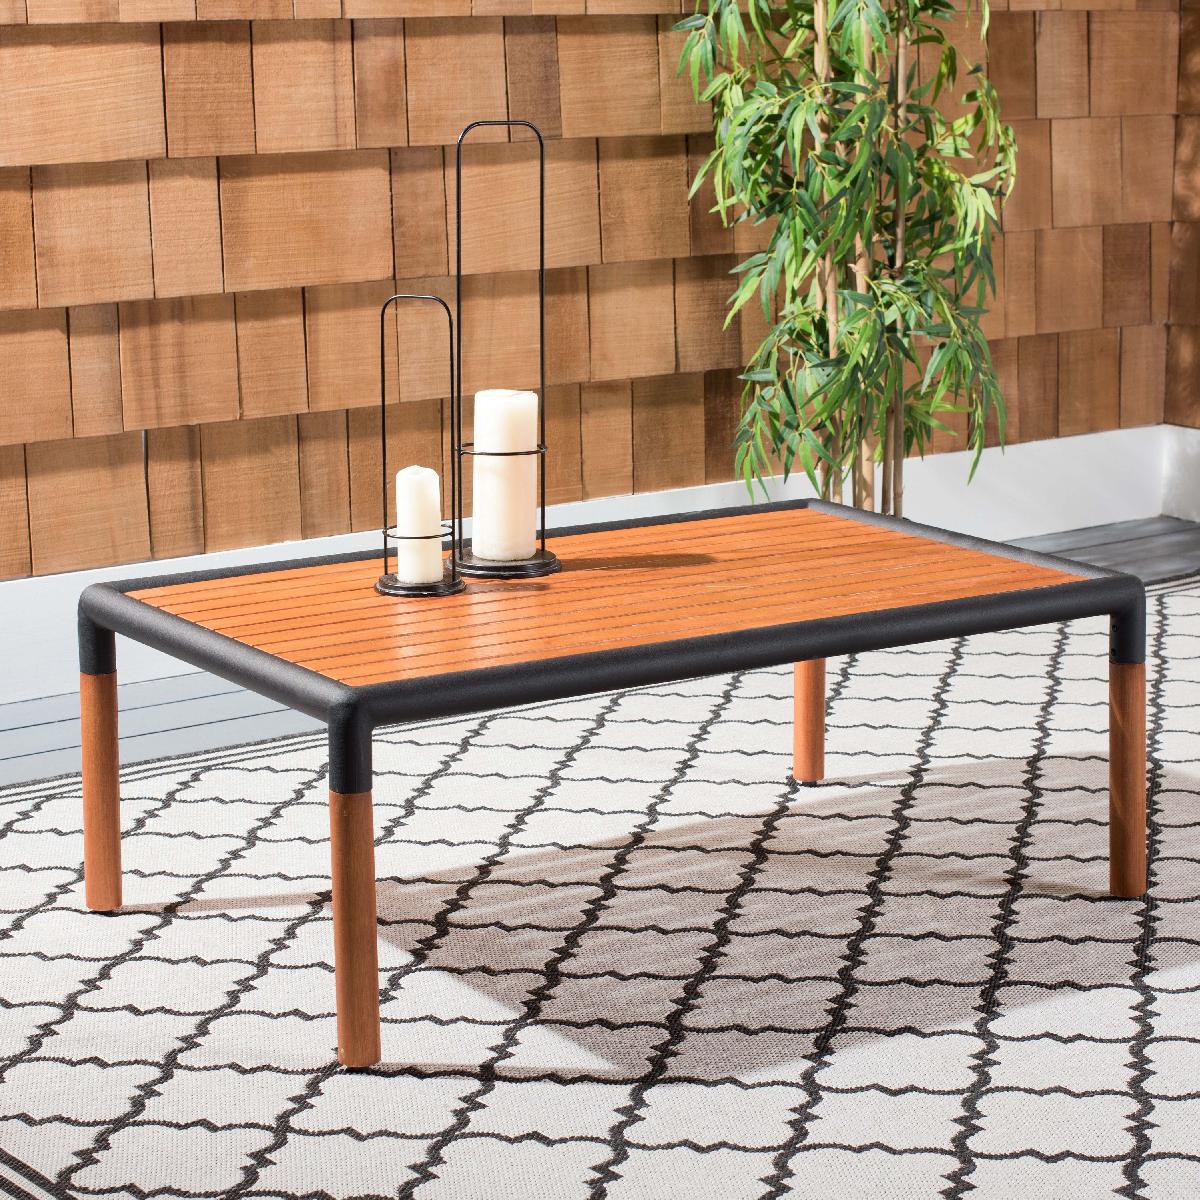 Safavieh Tommy Metal And Wood Patio Coffee Table, Black / Natural - Black / Natural